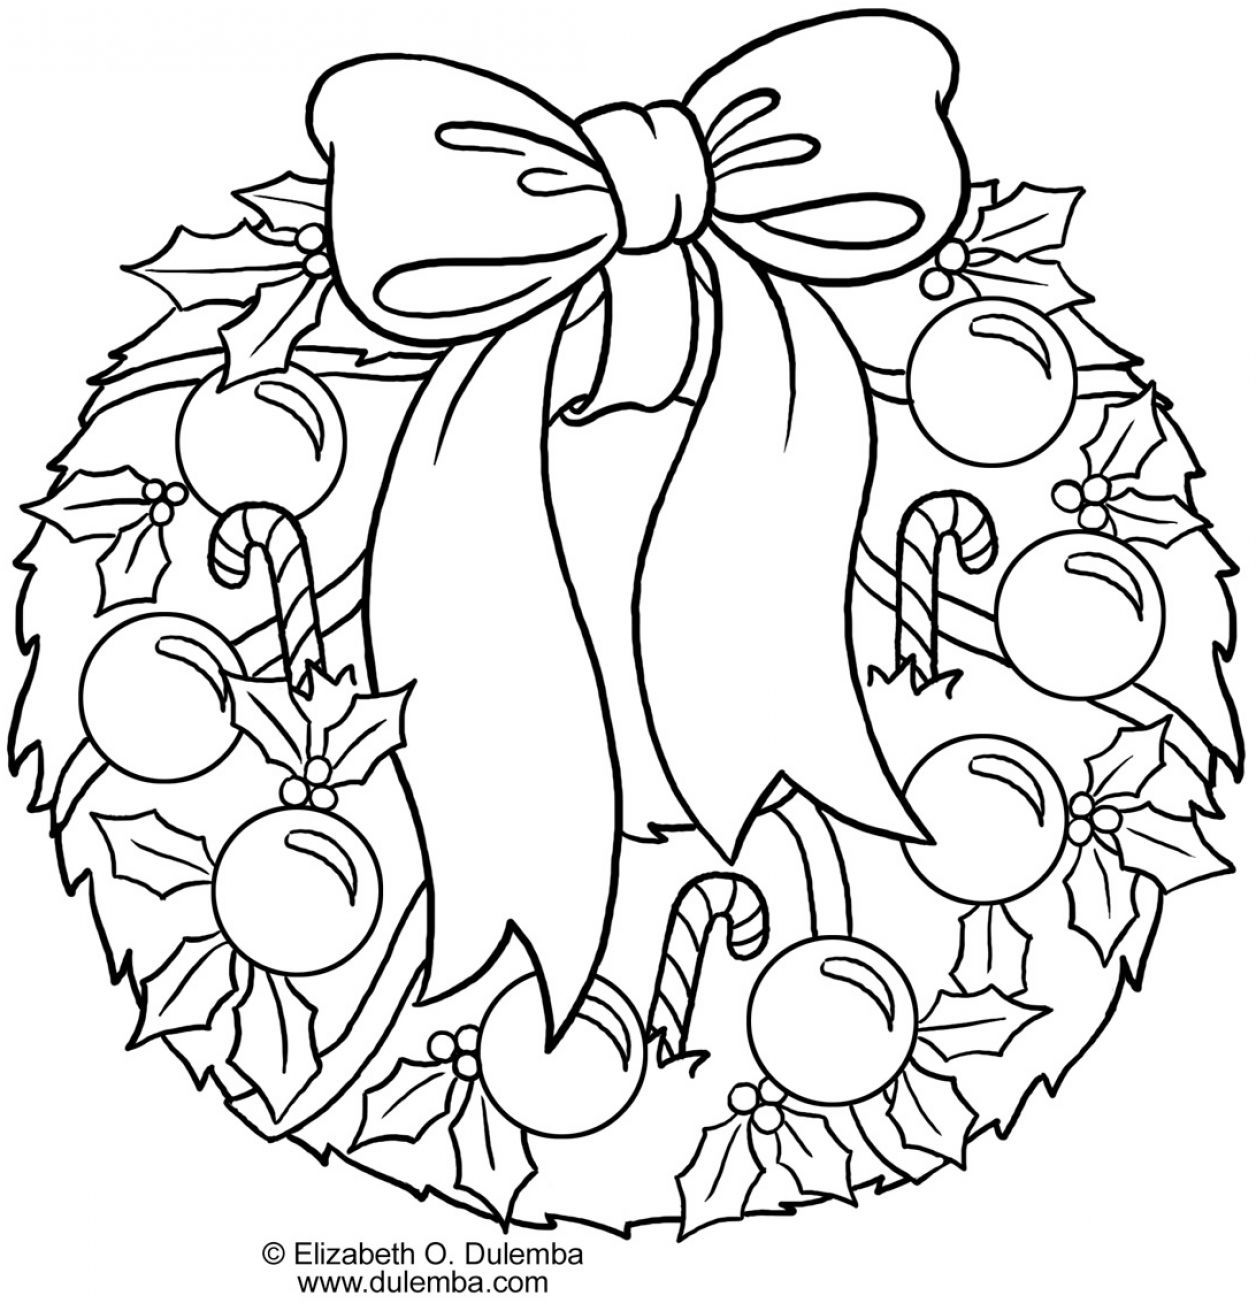 Printable Christmas Holly Coloring Pages - Coloring Home